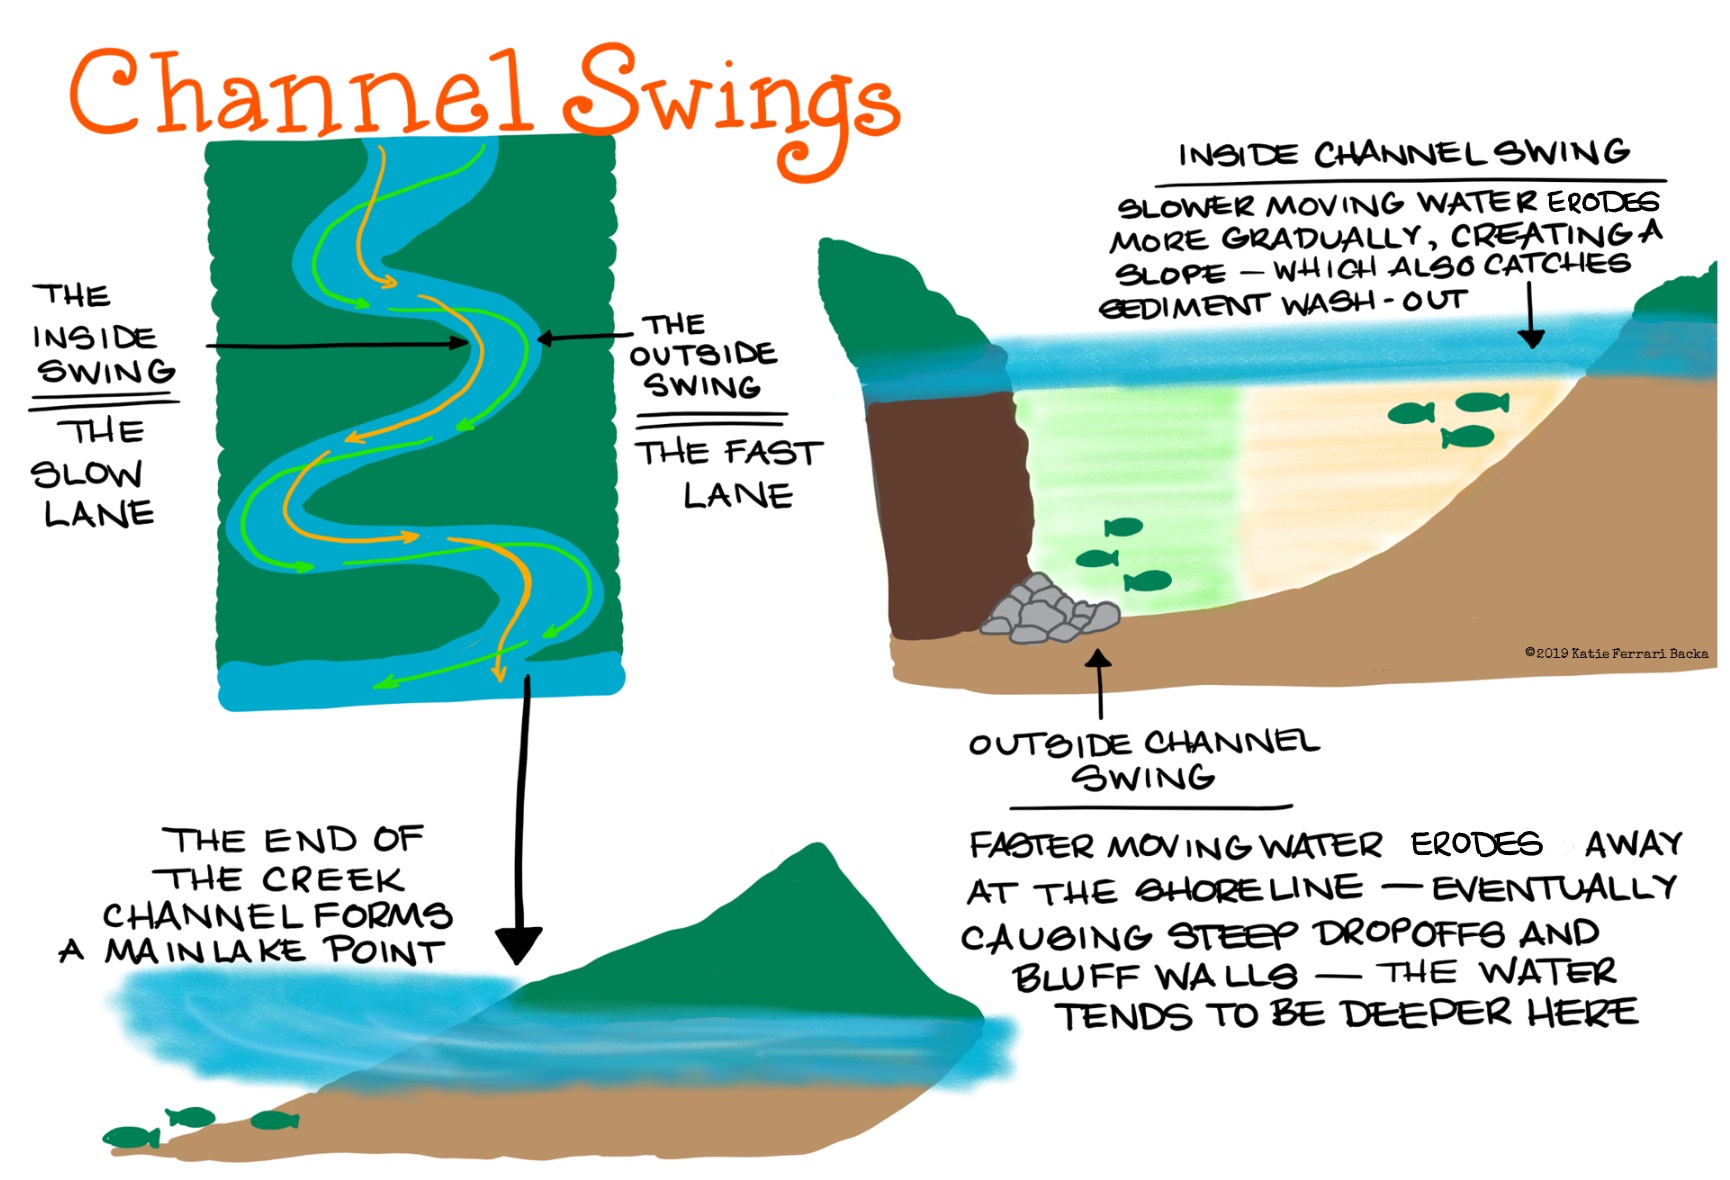 Written script around drawings of channel swings: Inside channel swing, the slow lane, slower moving water erodes more gradually, creating a slope, which also catches sediment washout. Outside channel swing, the fast lane, faster moving water erodes away at the shoreline, eventually causing steep drop-offs and bluff walls.  The water tends to be deeper here. The end of a creek channel forms a main lake point.